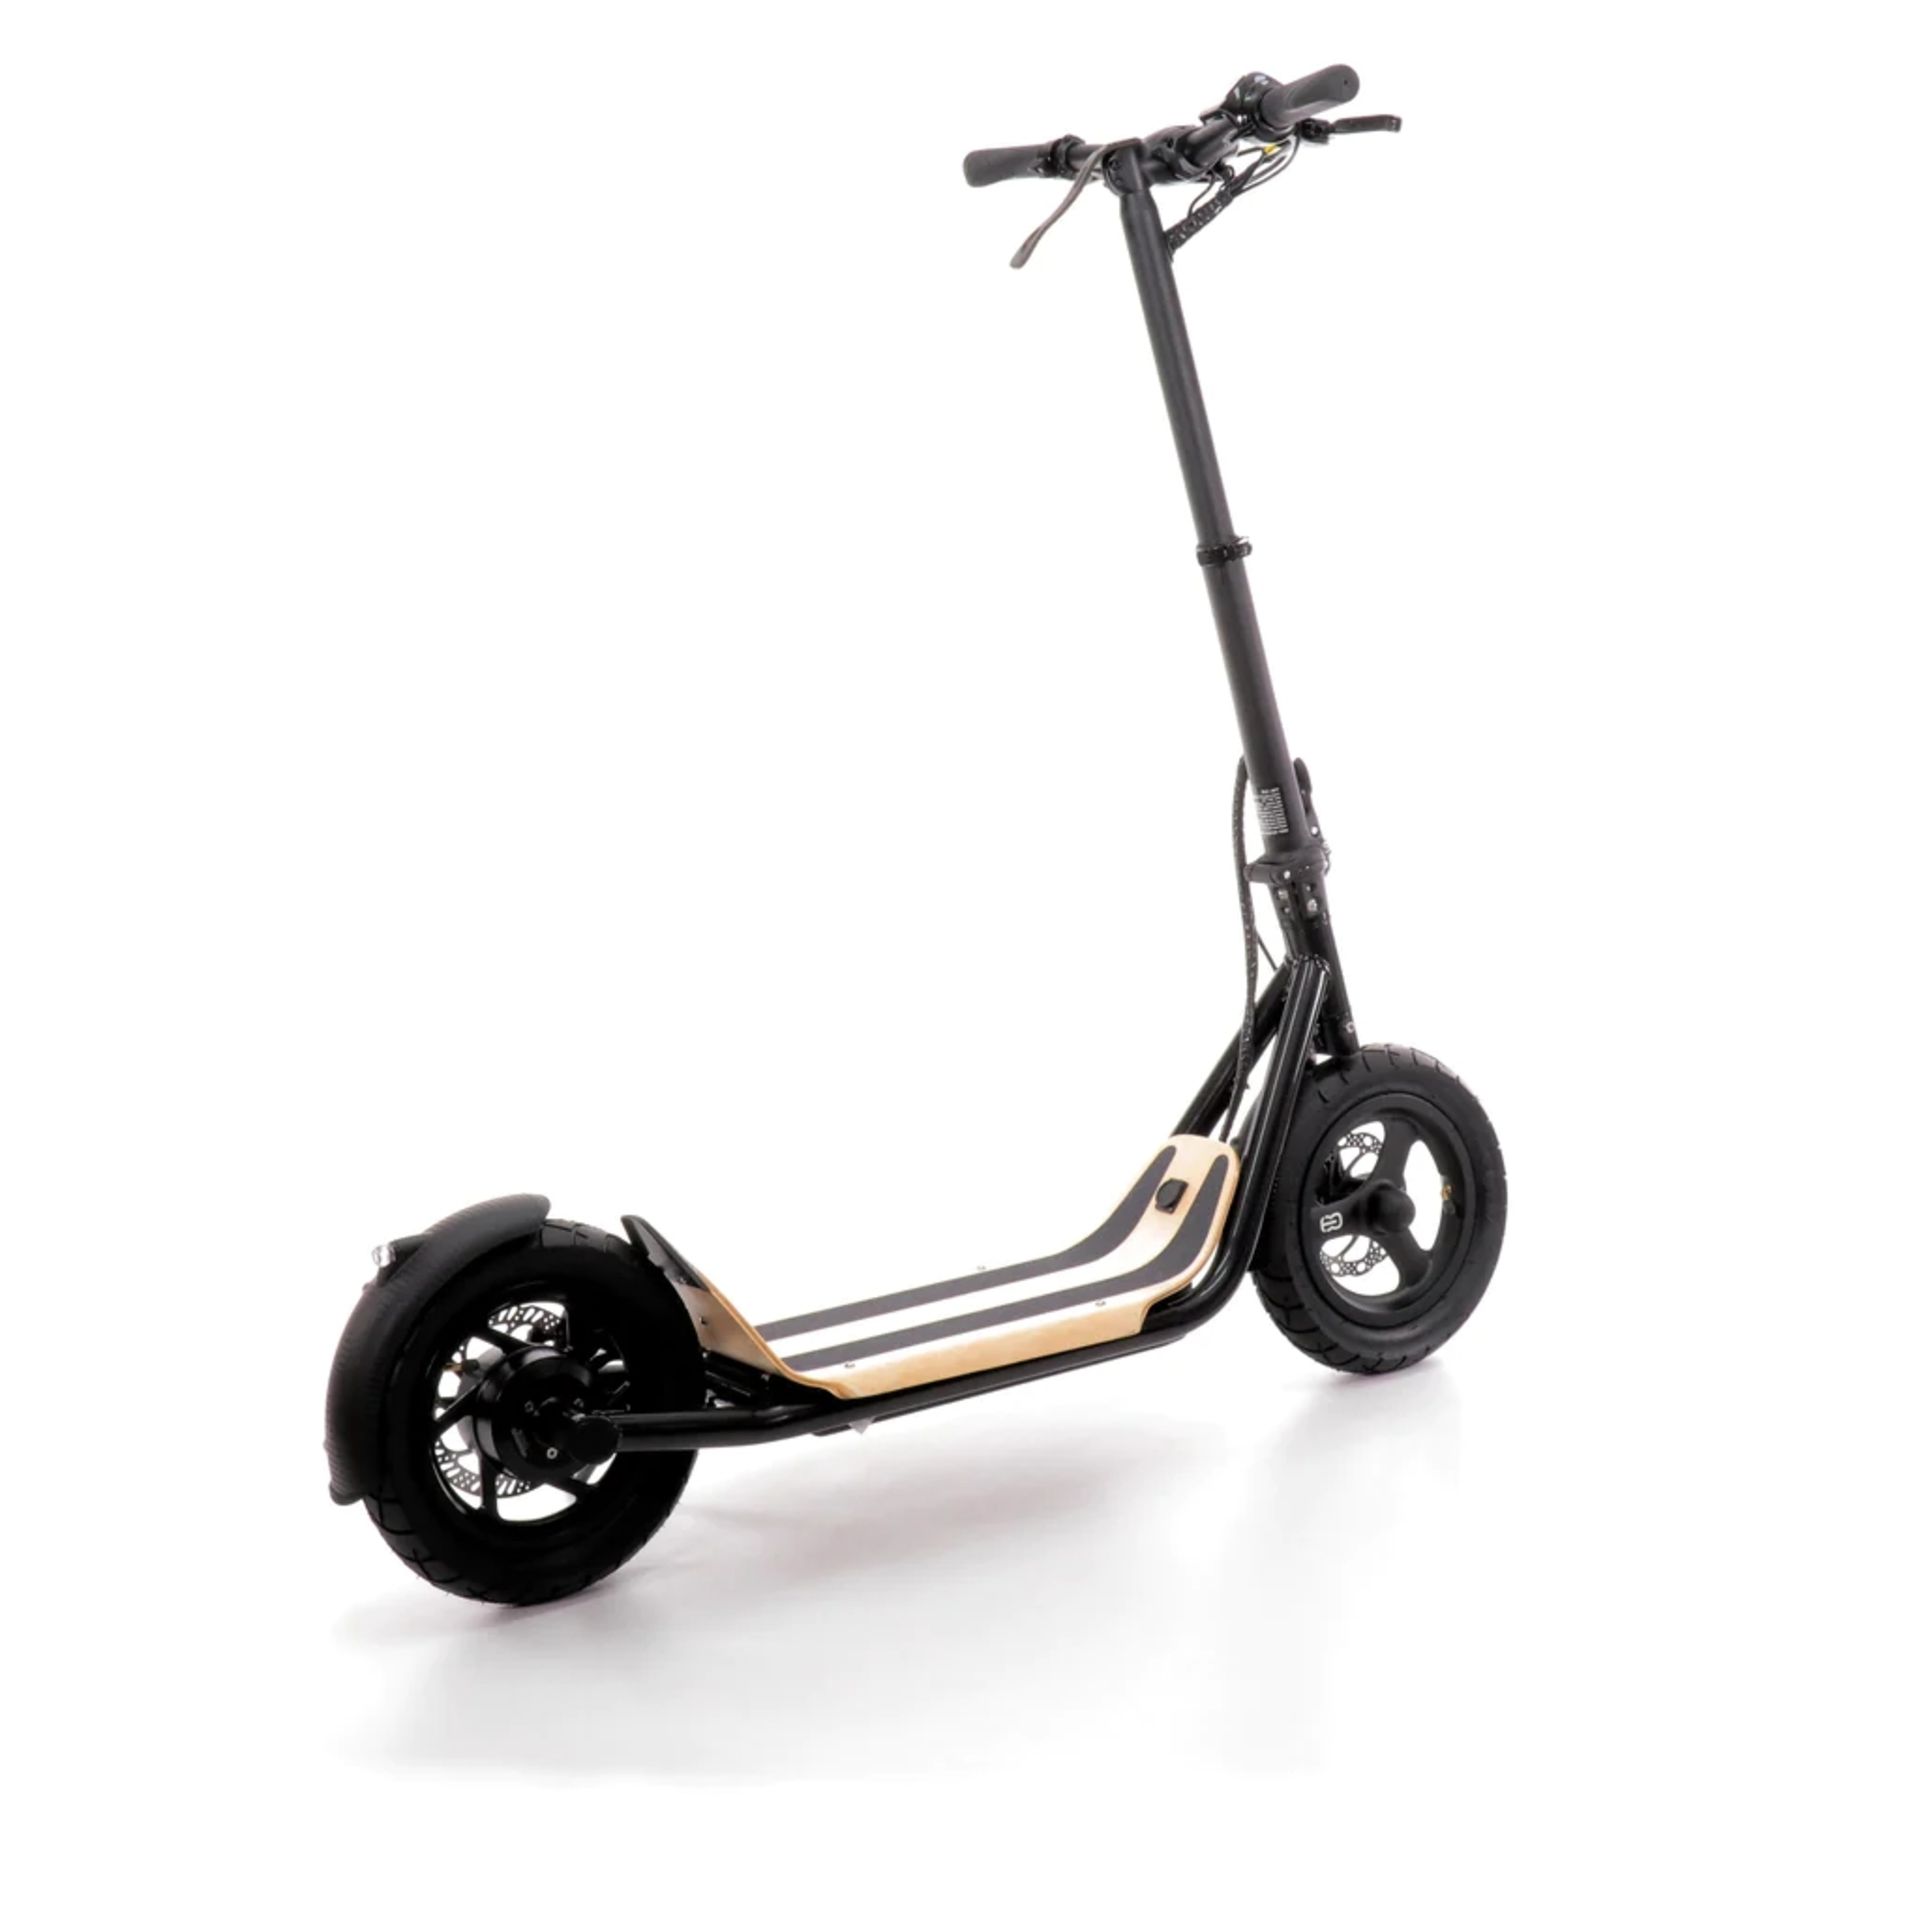 BRAND NEW 8TEV B12 PROXI ELECTRIC SCOOTER GLOSS BLACK RRP £1299, Perfect city commuter vehicle - Image 3 of 3